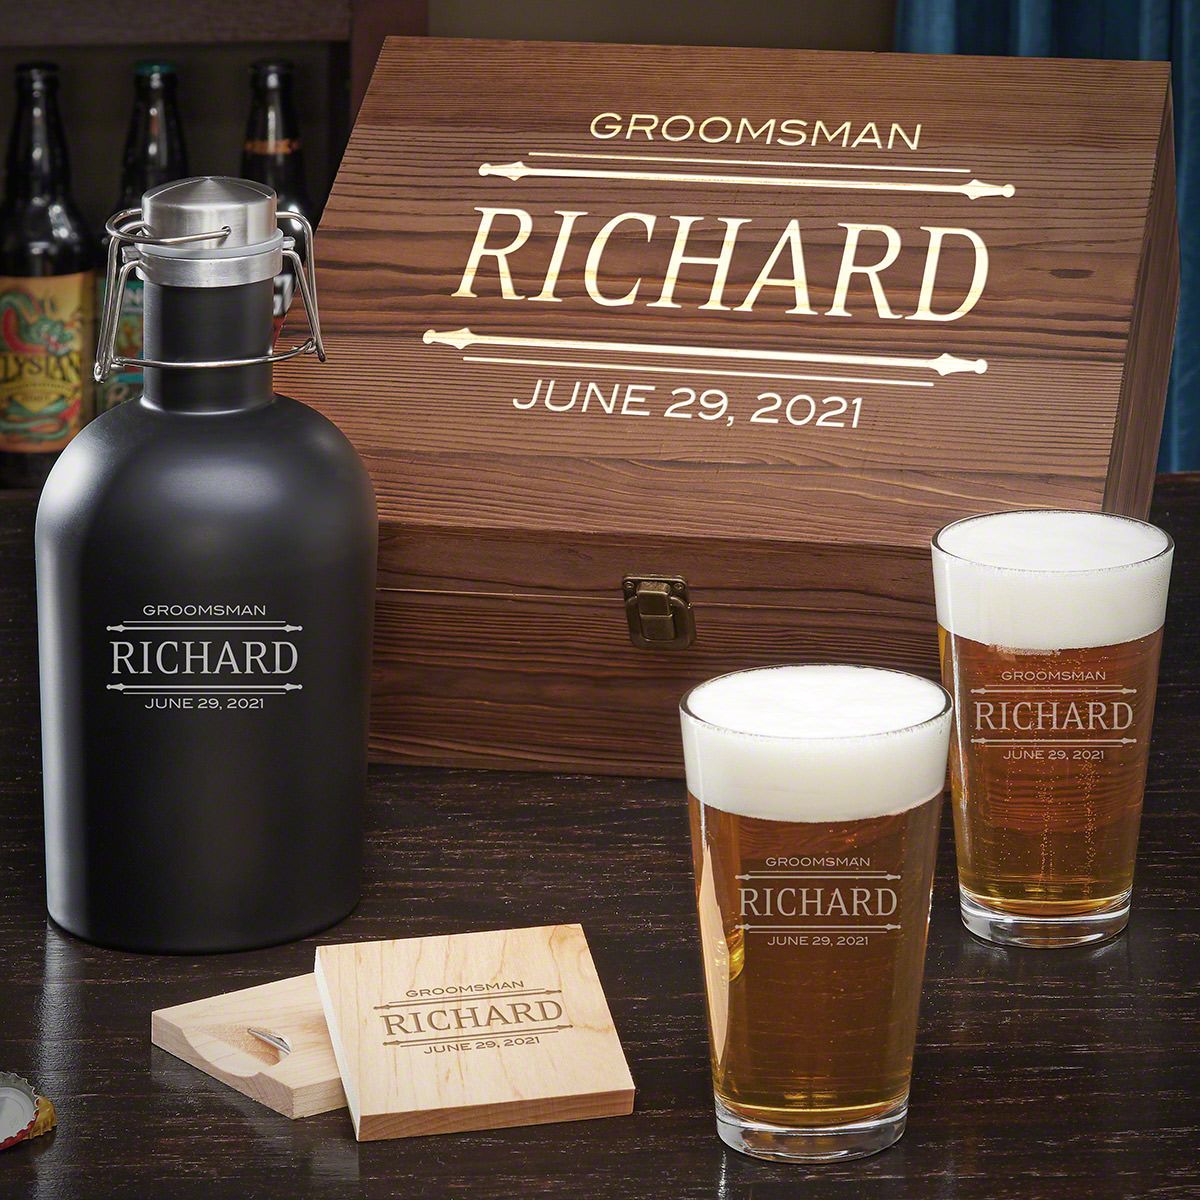 https://images.homewetbar.com/media/catalog/product/7/8/7863-stanford-pint-glass-set-with-blackout-growler-and-wooden-coasters-primary-up-12-12.jpg?store=default&image-type=image